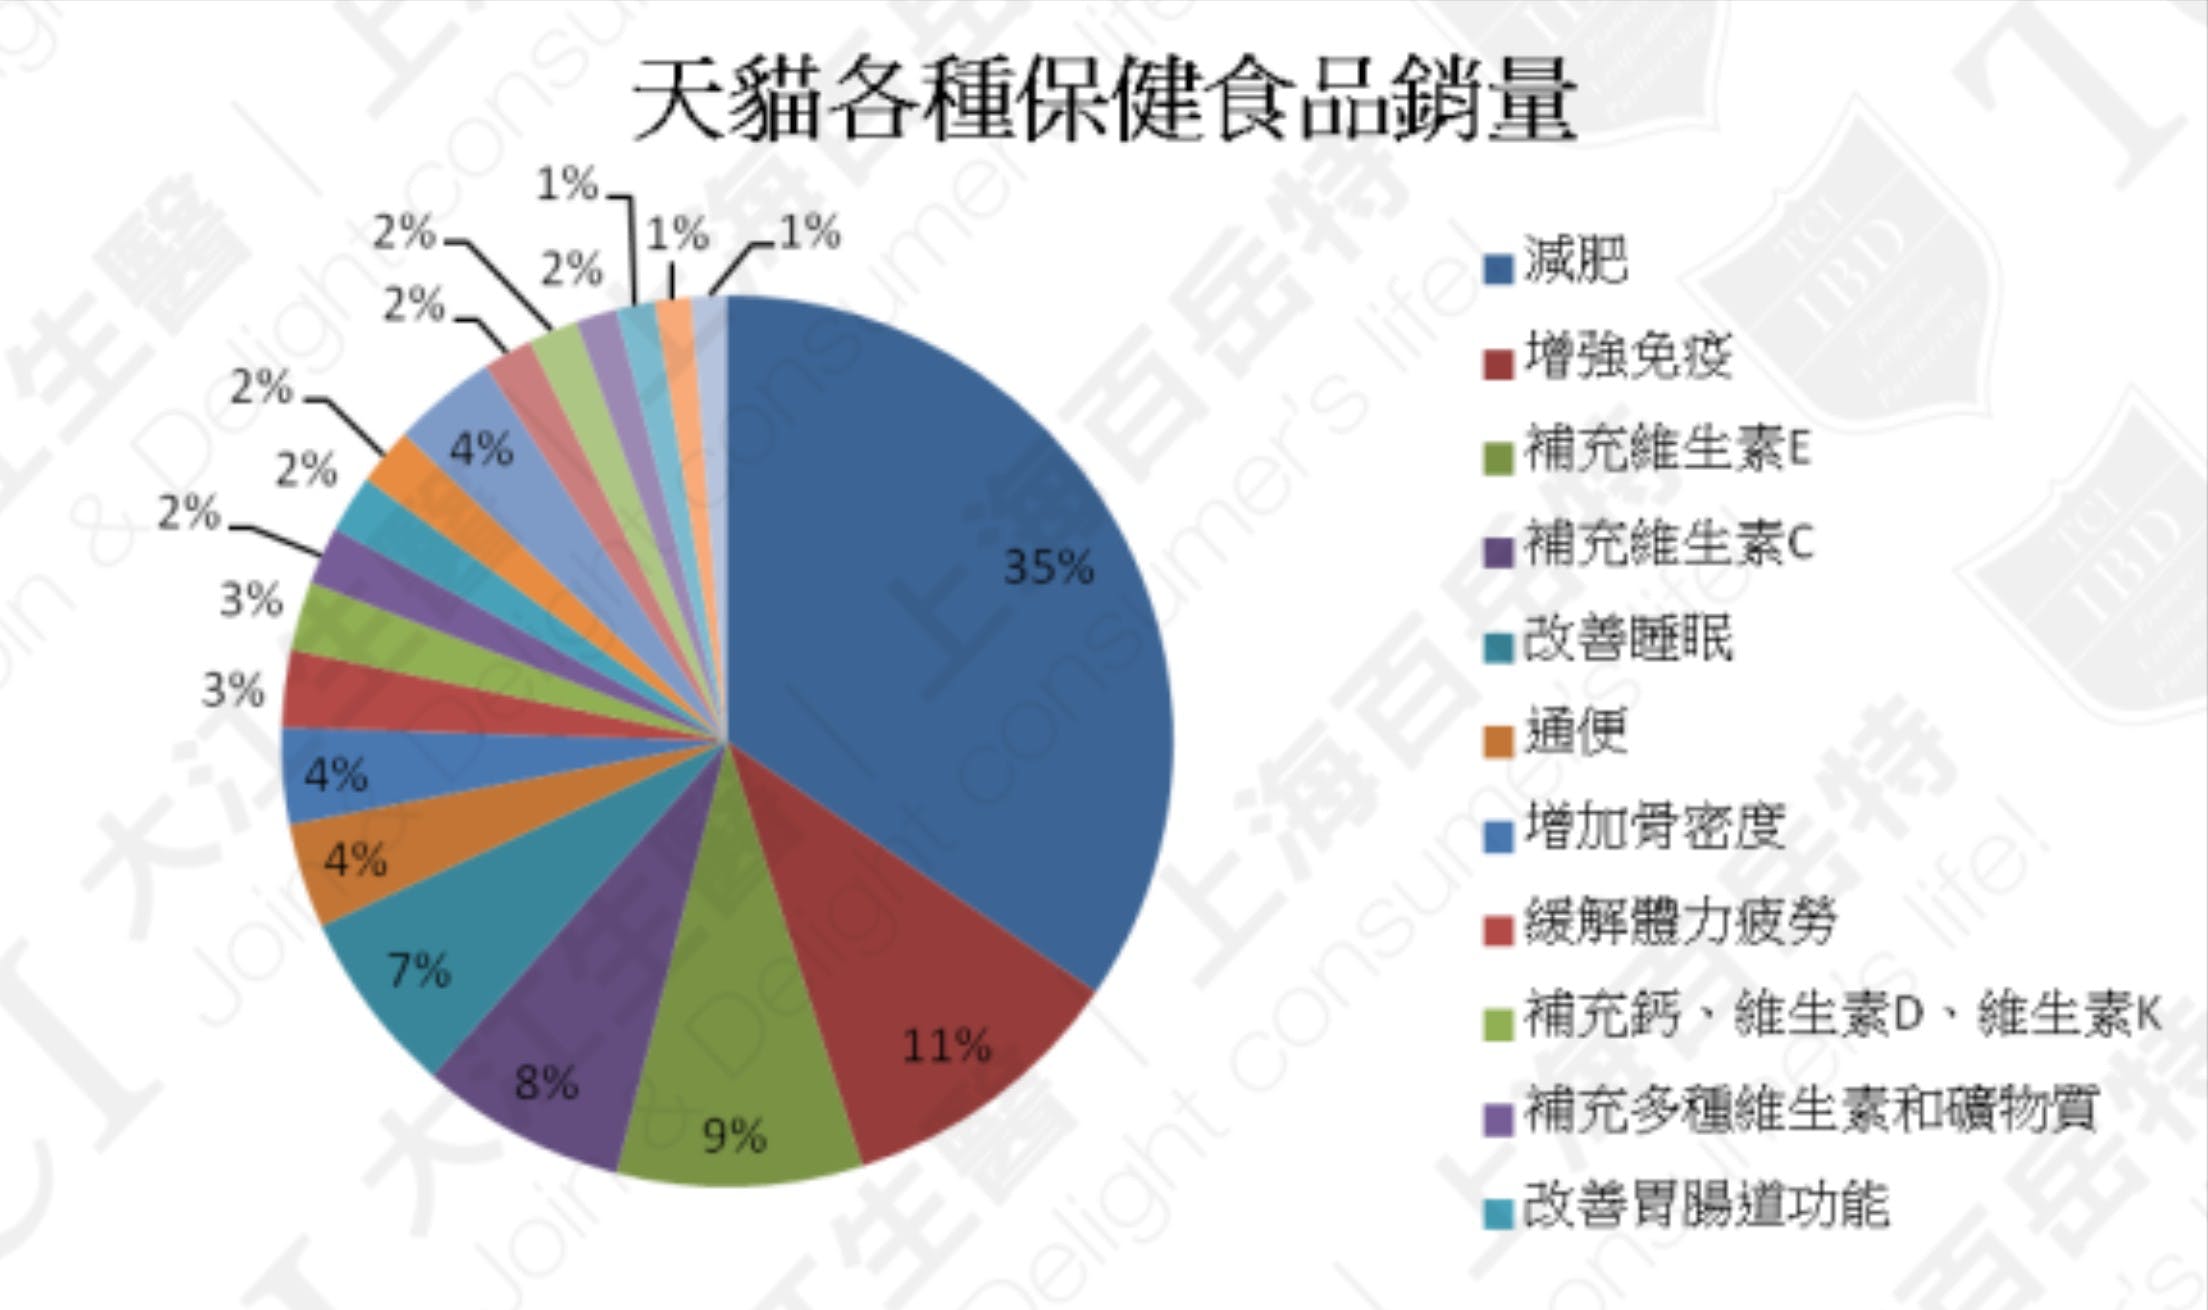 The sales of different categories of dietary supplements on Tmall, Data Source: Tmall